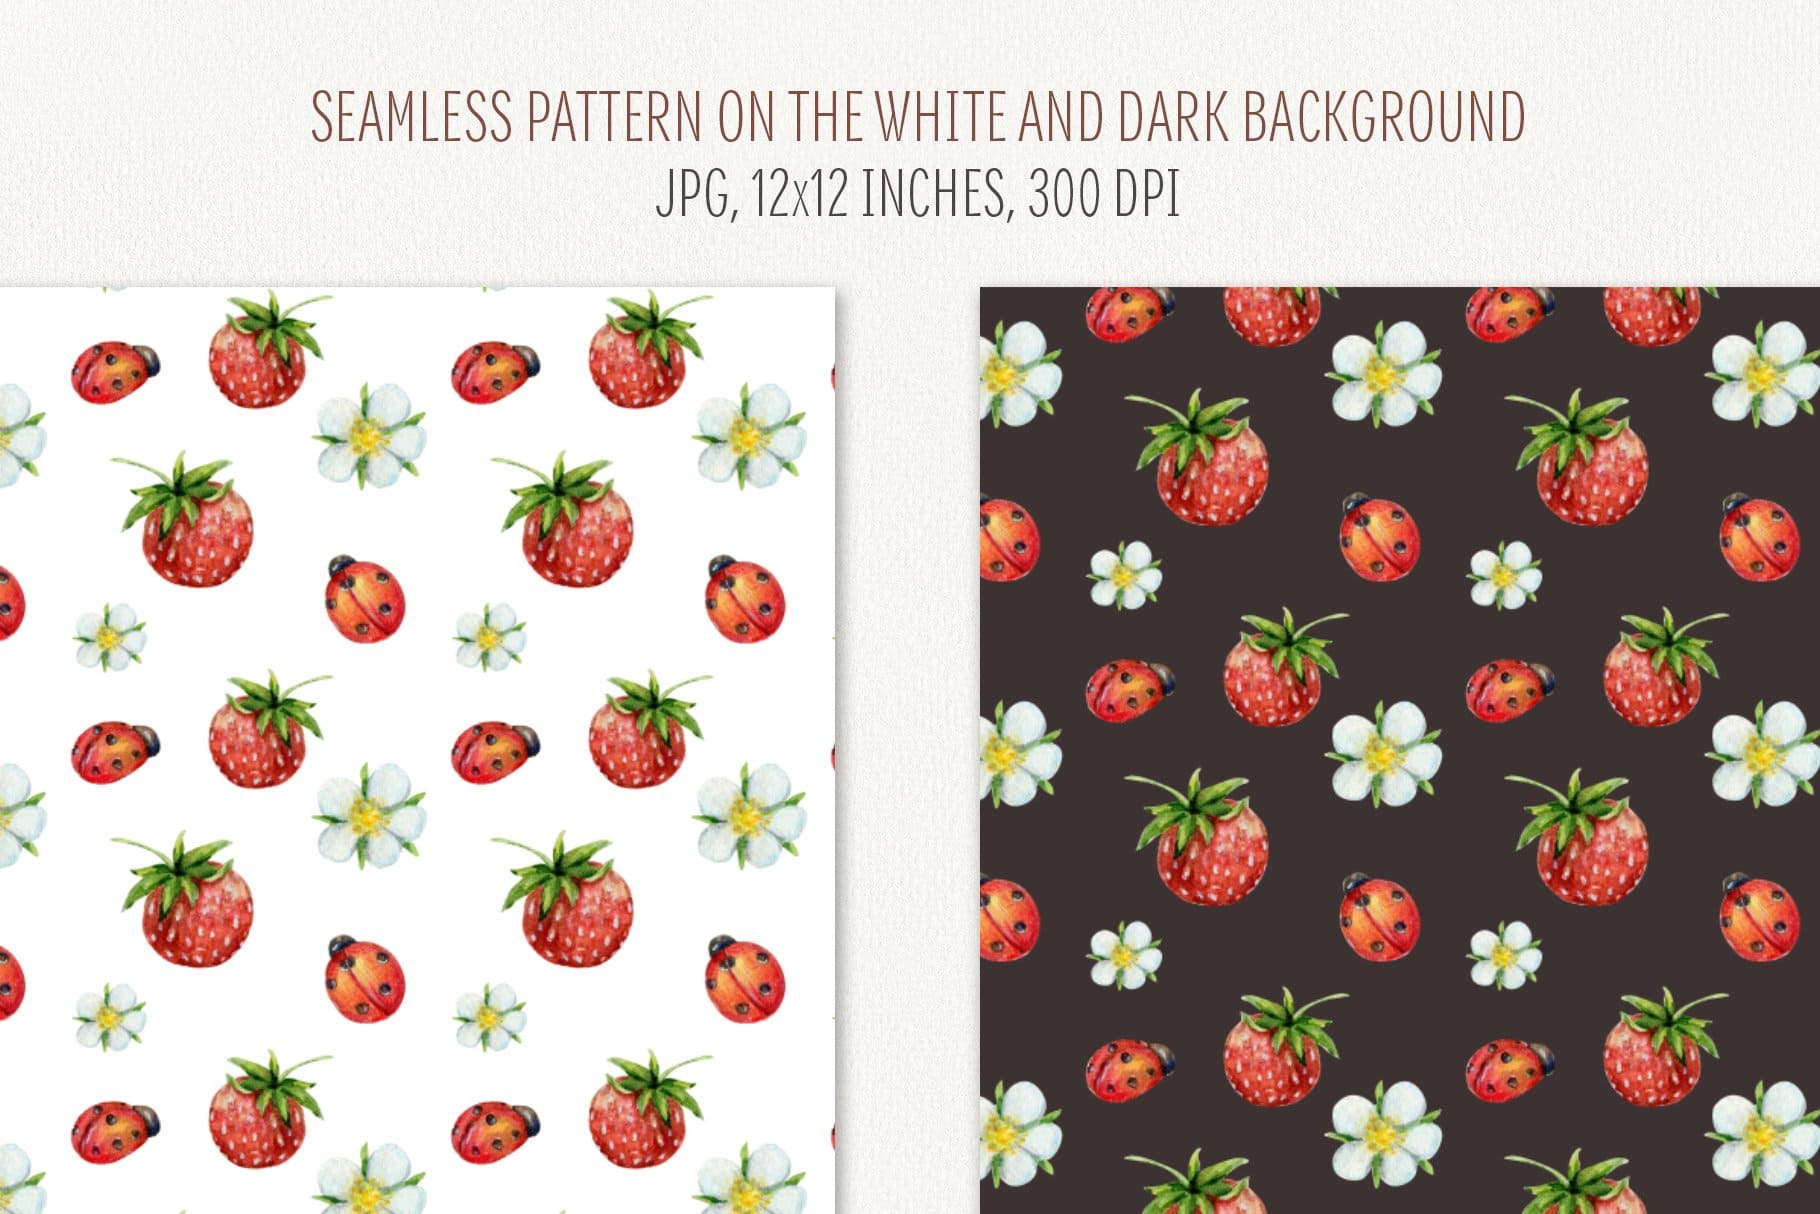 Red strawberries and white strawberry flowers on white and black backgrounds.